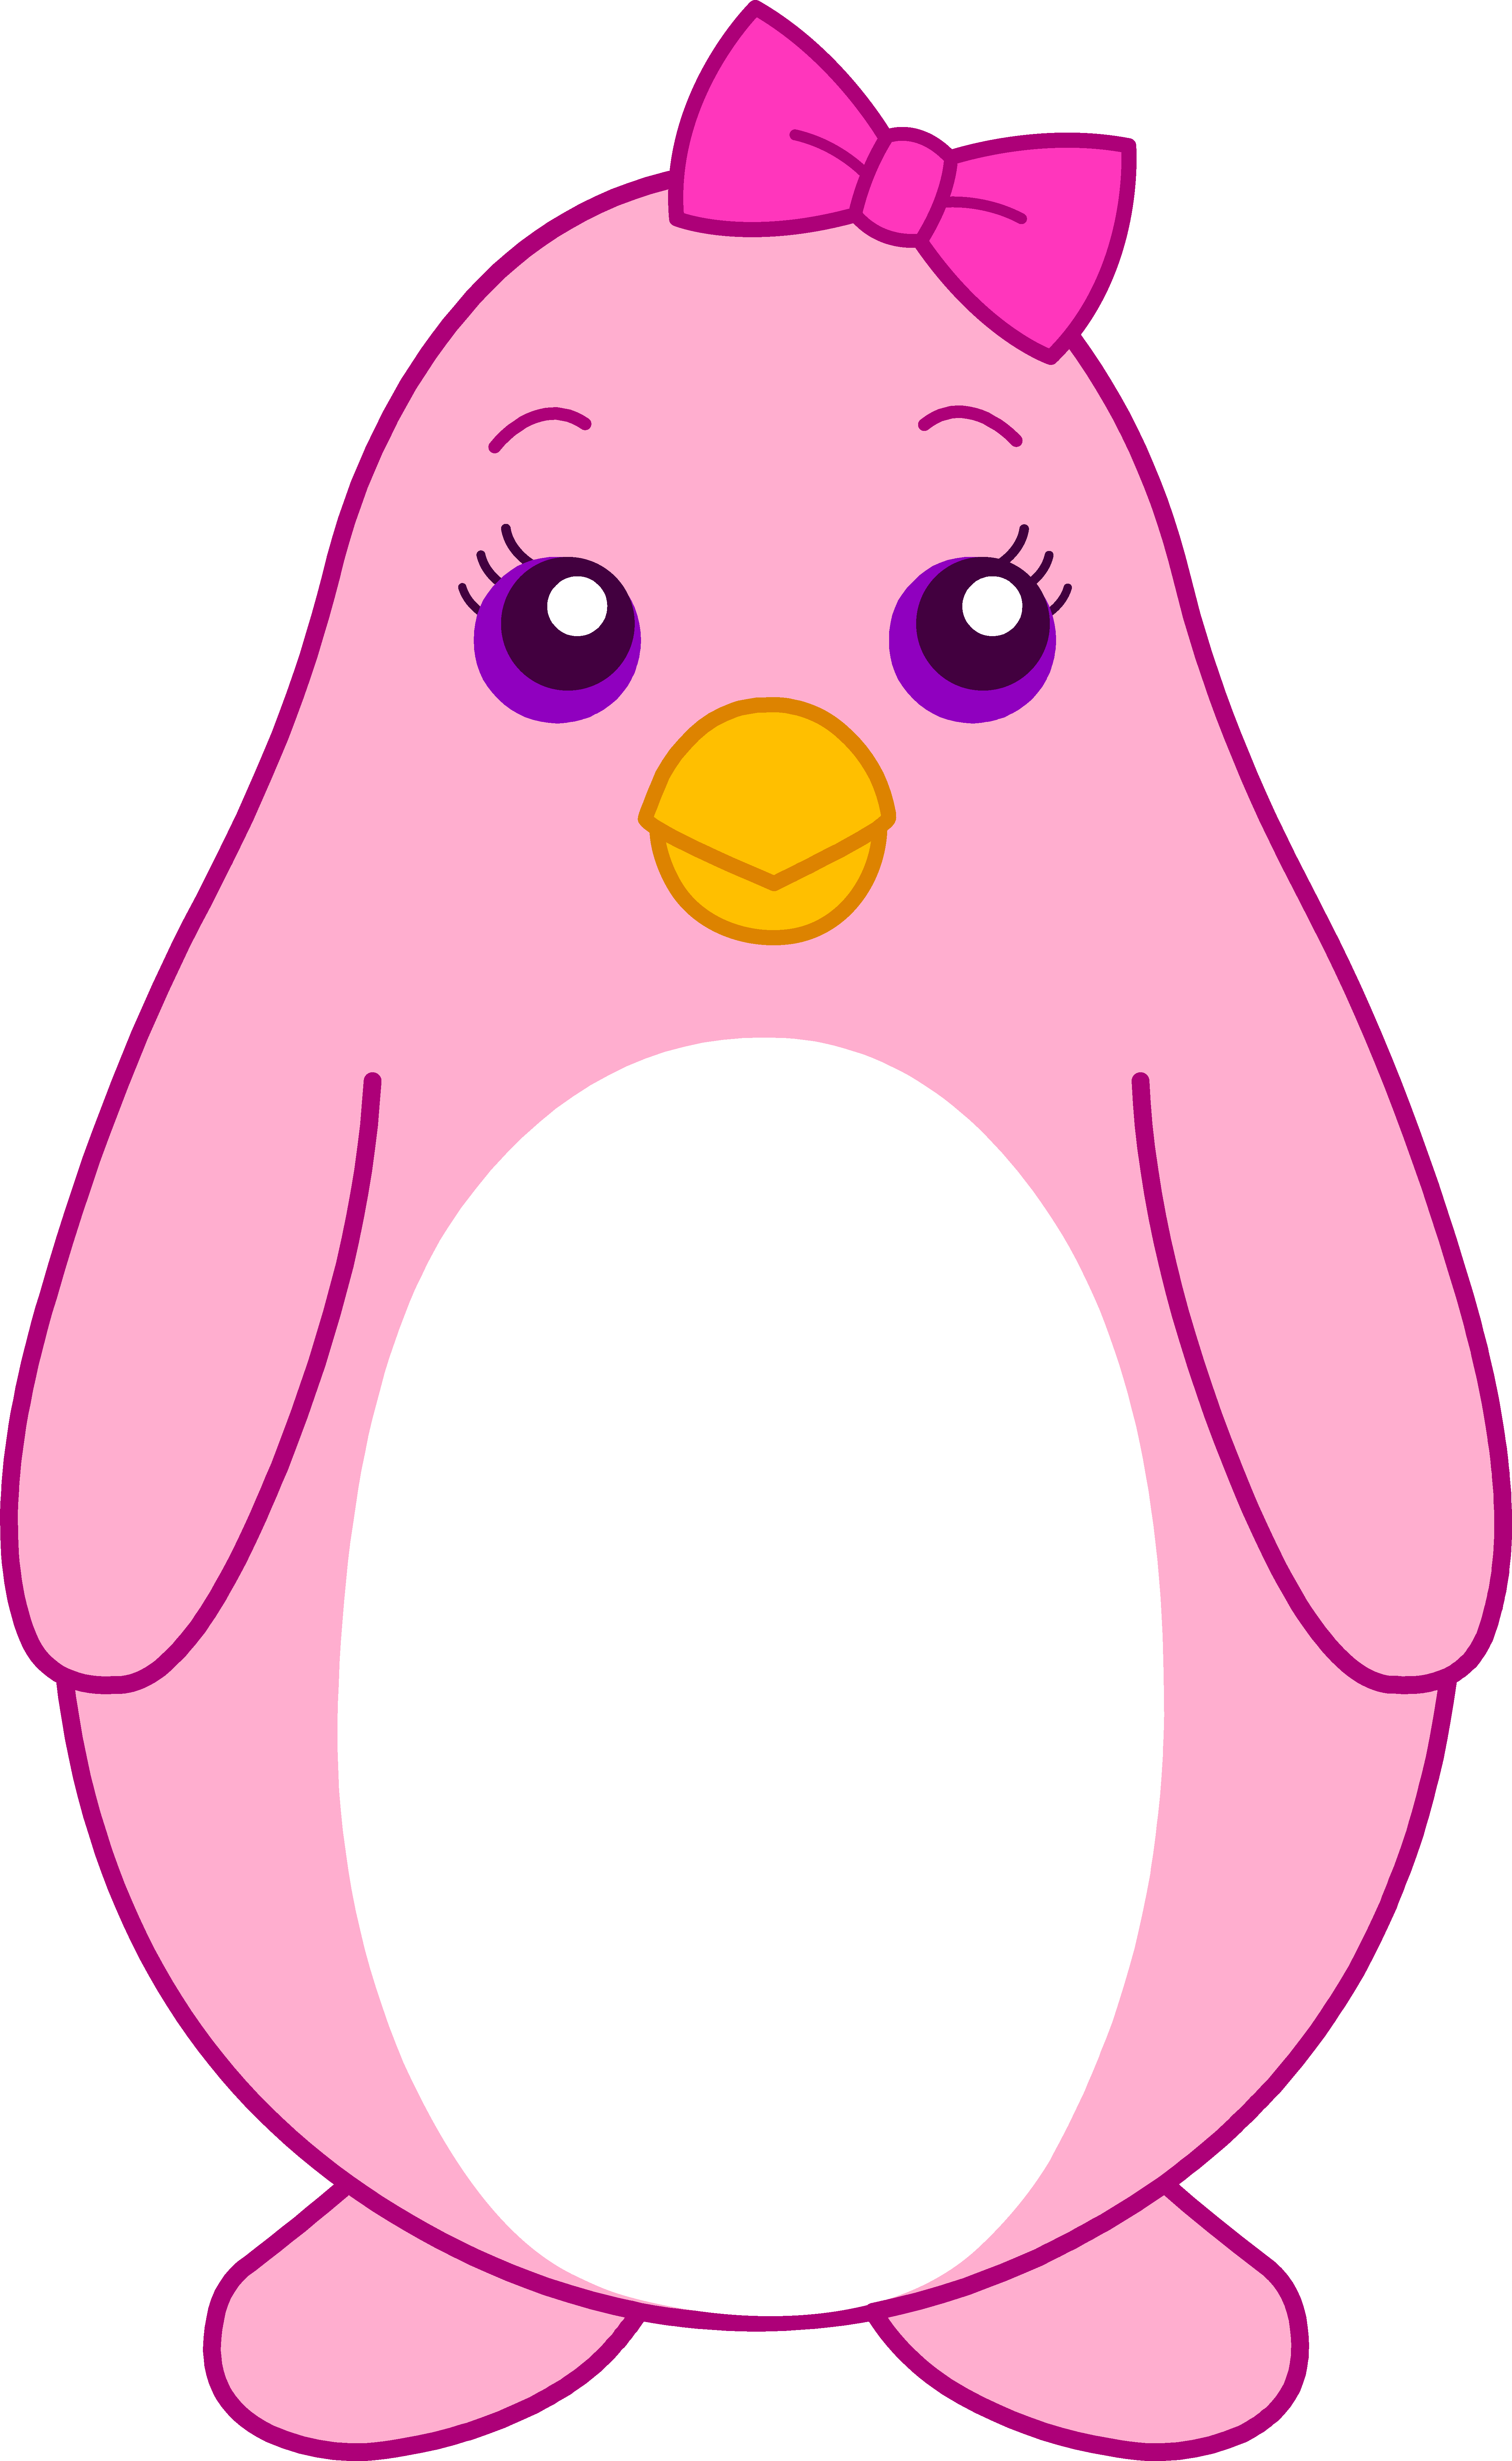 Clipart penquin design. Pink girly penguin with